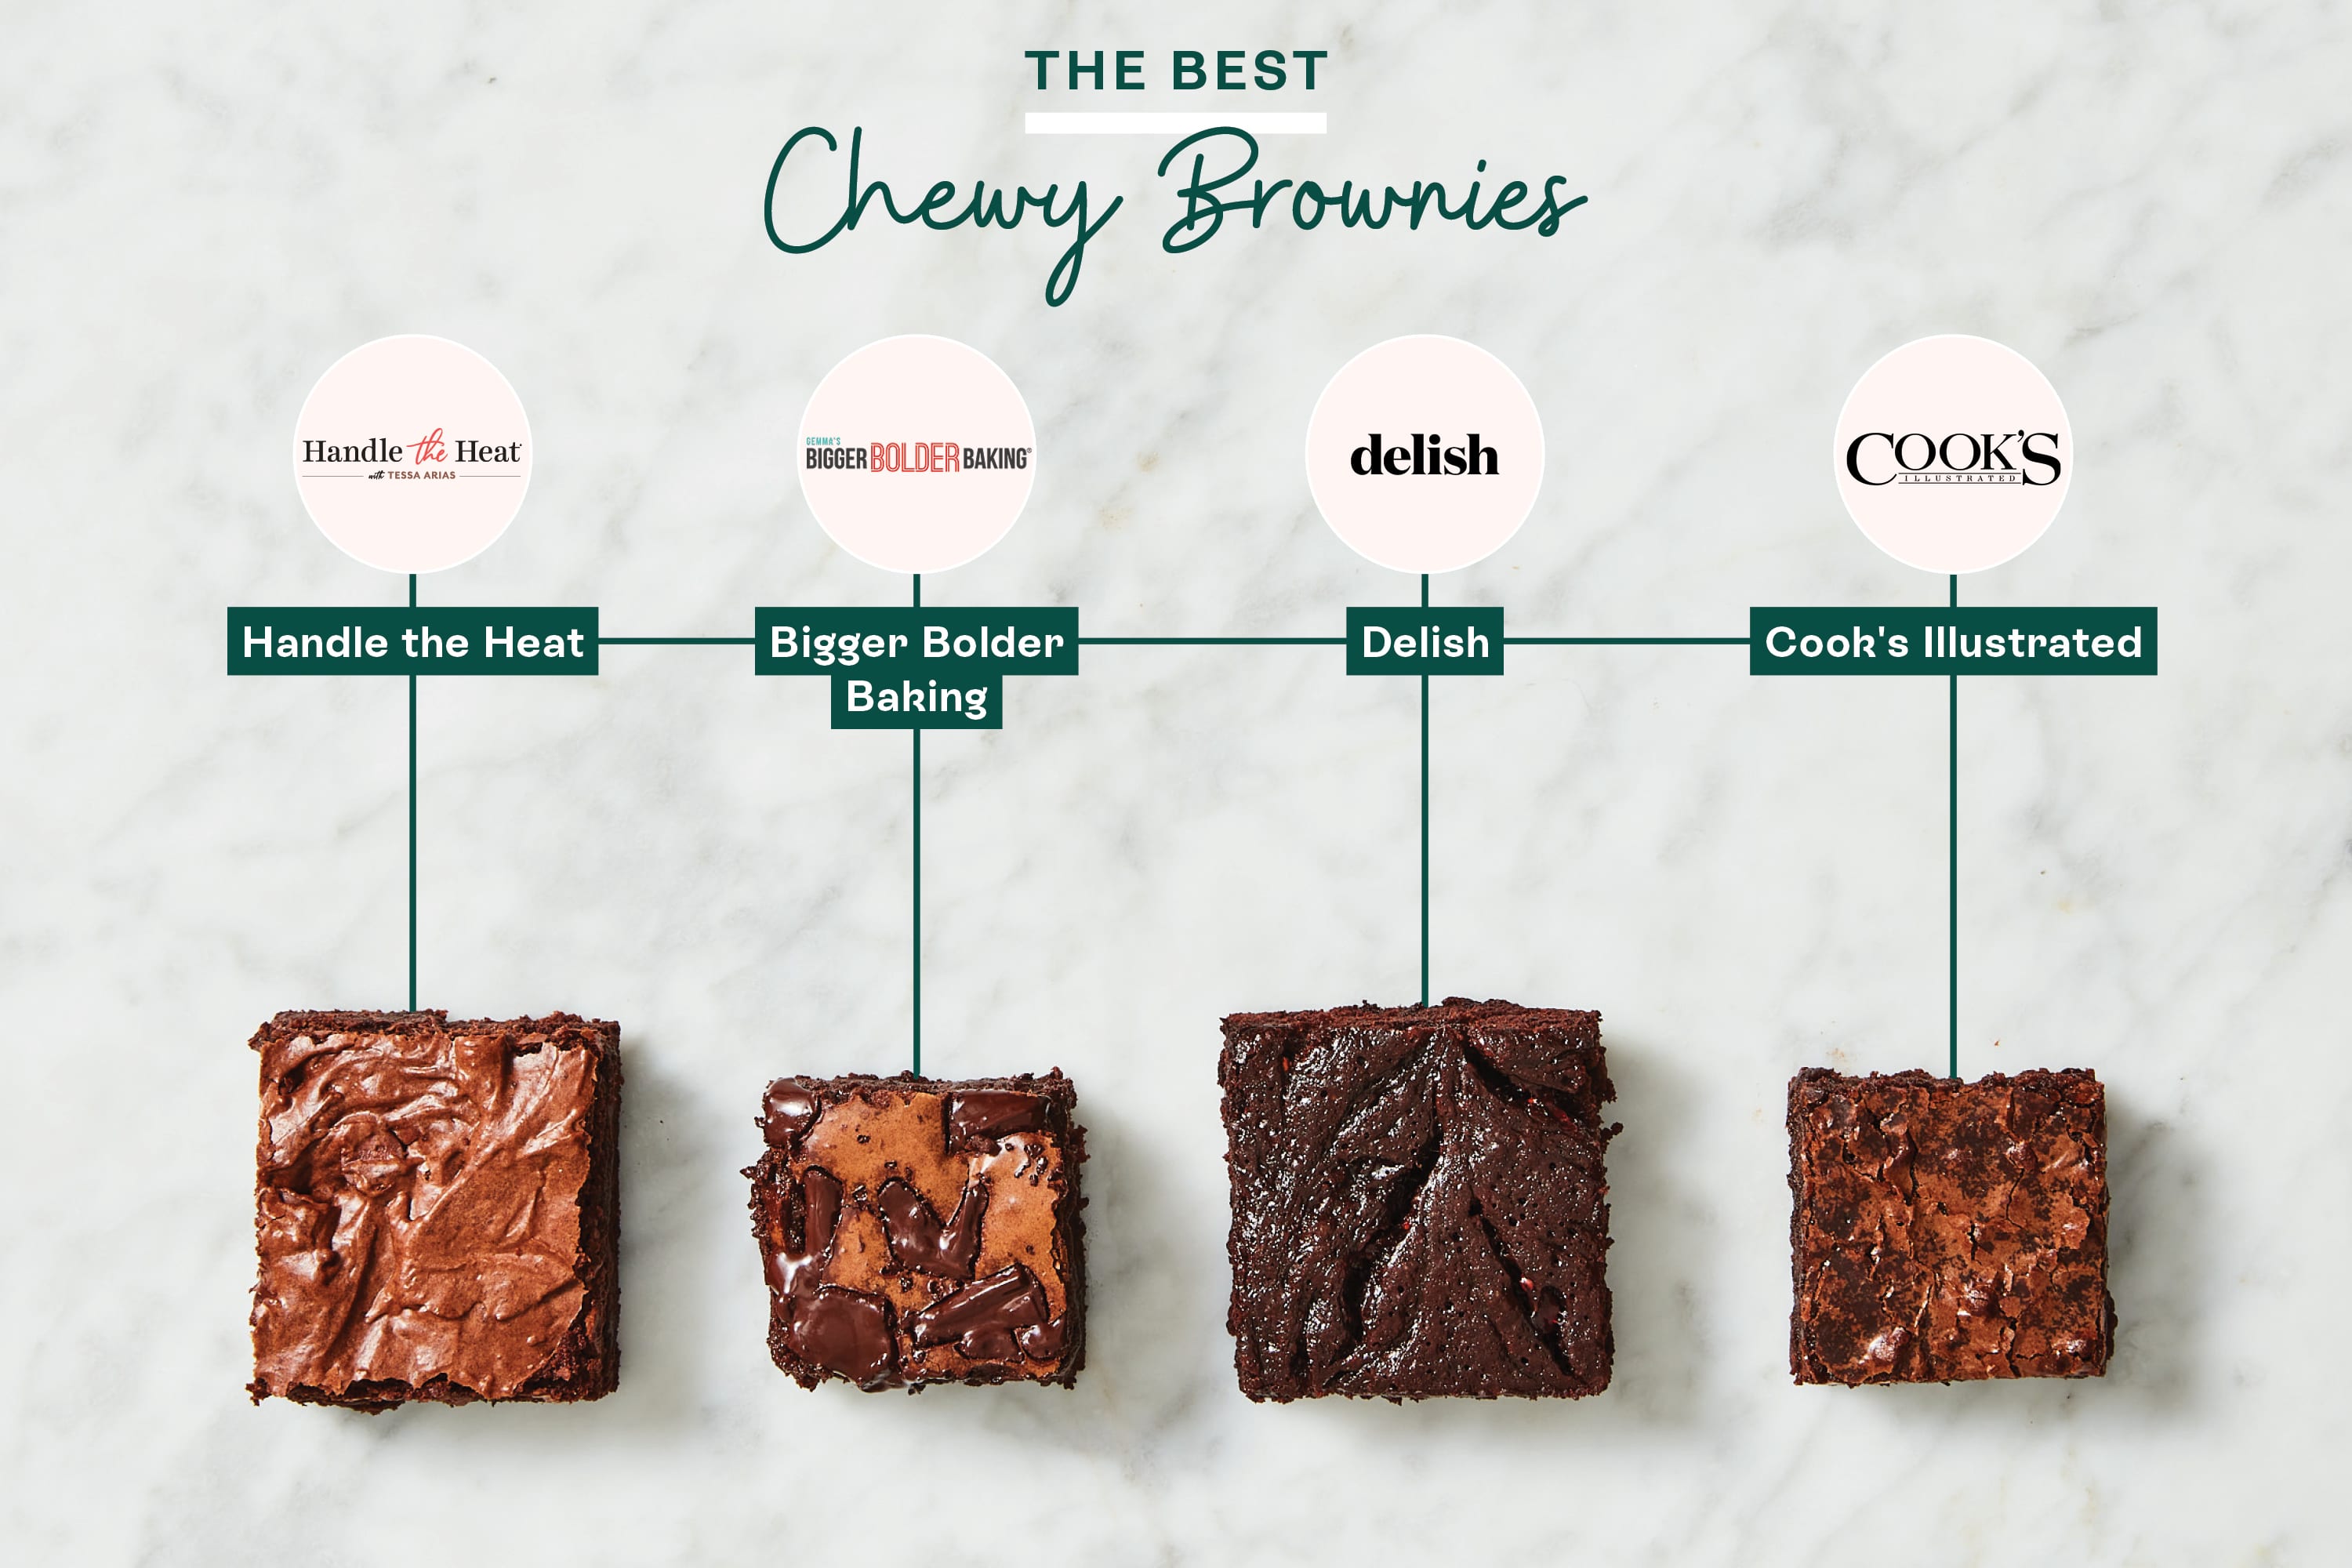 https://cdn.apartmenttherapy.info/image/upload/v1666279172/k/Photo/Series/2022-11-recipe-showdown-chewy-brownies/Recipe-Showdown-Chewy-Brownies-horizontal.jpg